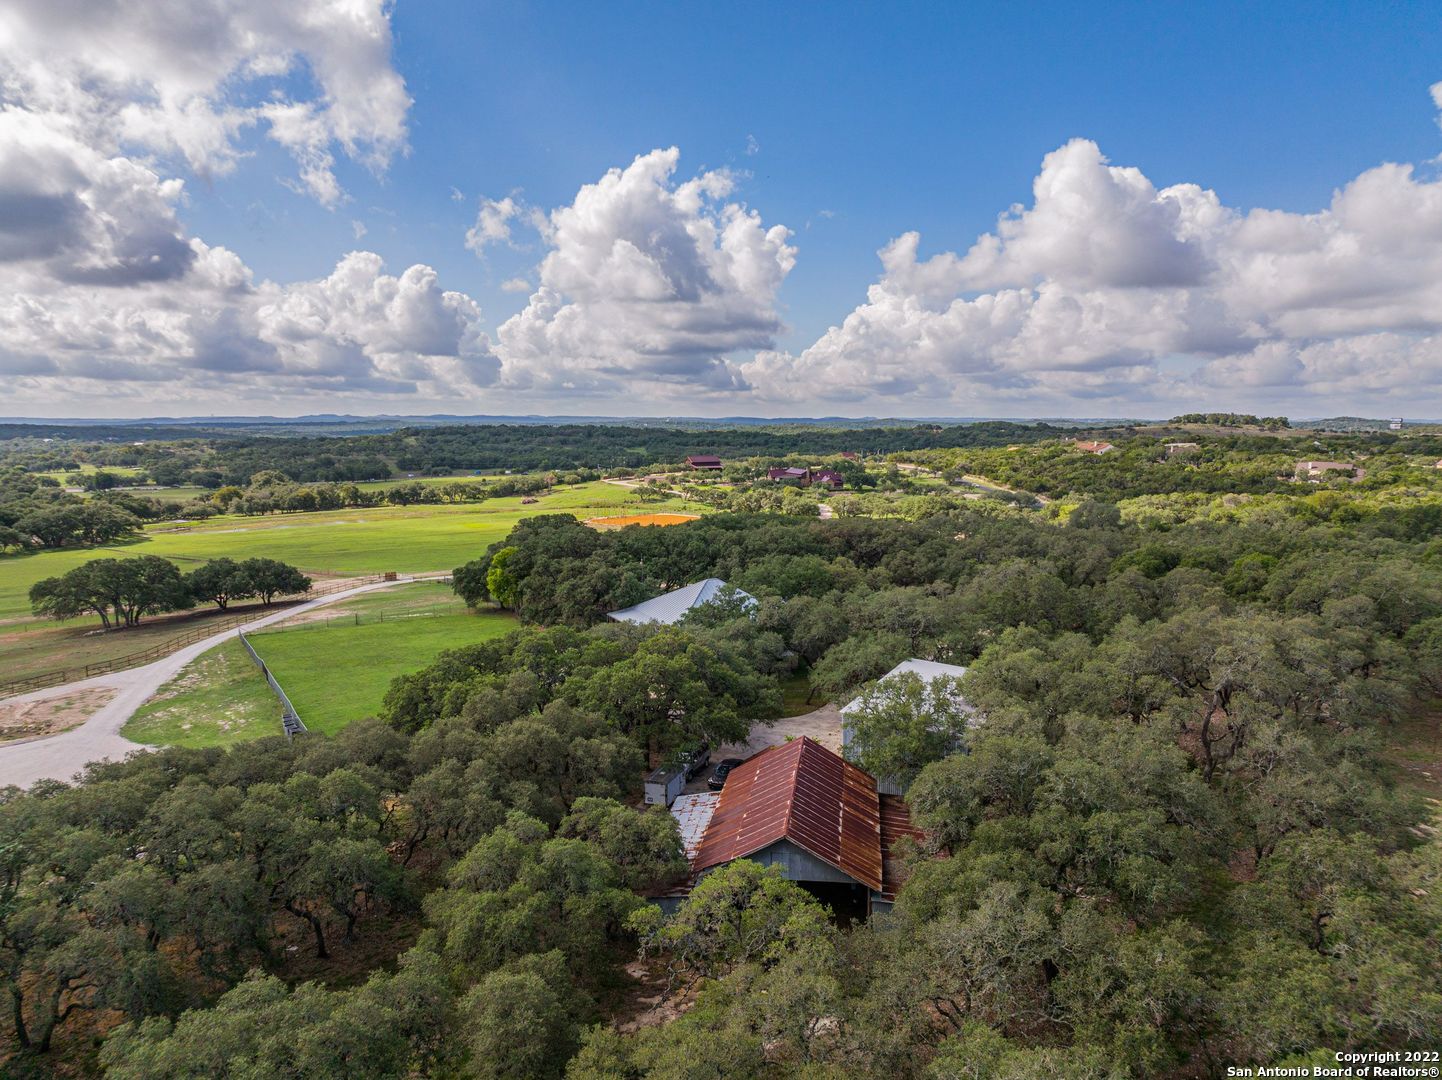 Beautiful historical property in Boerne!  This one of a kind home sits on almost 7 acres, has tons of mature oak trees, rustic barn and workshop to hold all of your outdoor machinery or livestock. The original part of the home has the original wood flooring, windows with architectural framing, high ceilings, doors, hardware and wainscoting. Gorgeous hill country views relaxing on the back porch or sitting on the balcony.  Property would make a fantastic bed and breakfast.